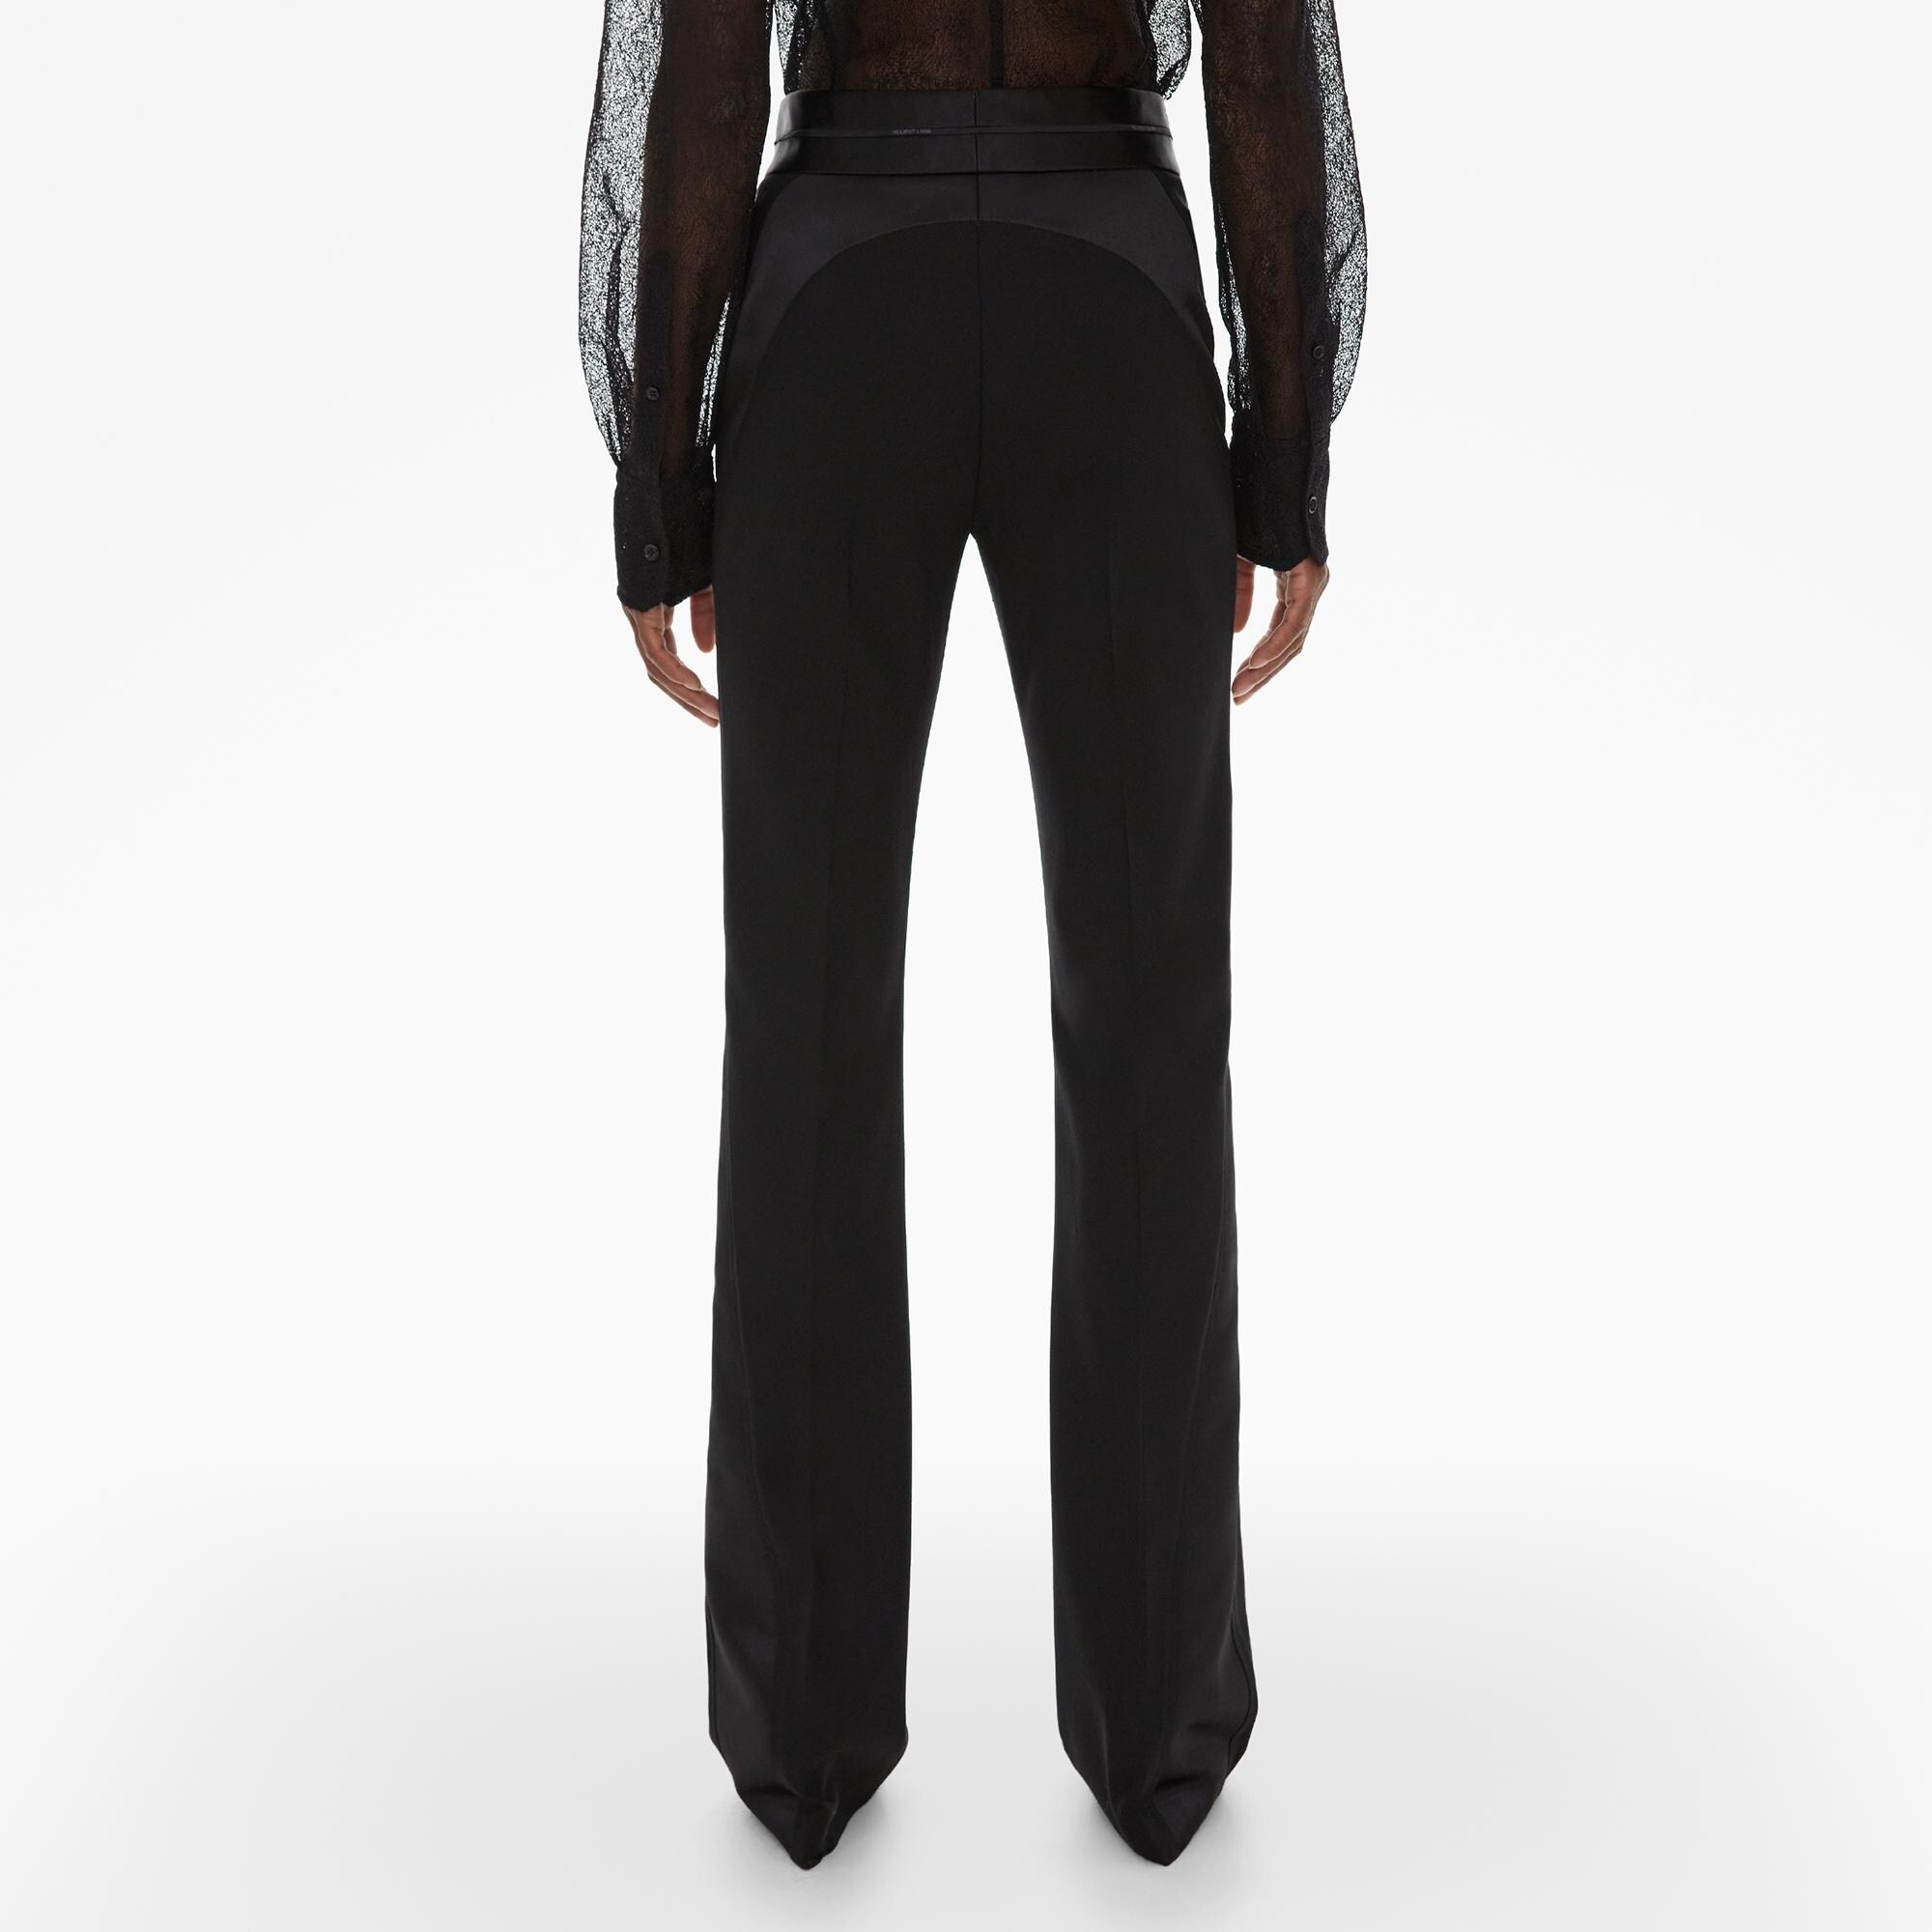 SEAMED BOOTCUT PANT - 4